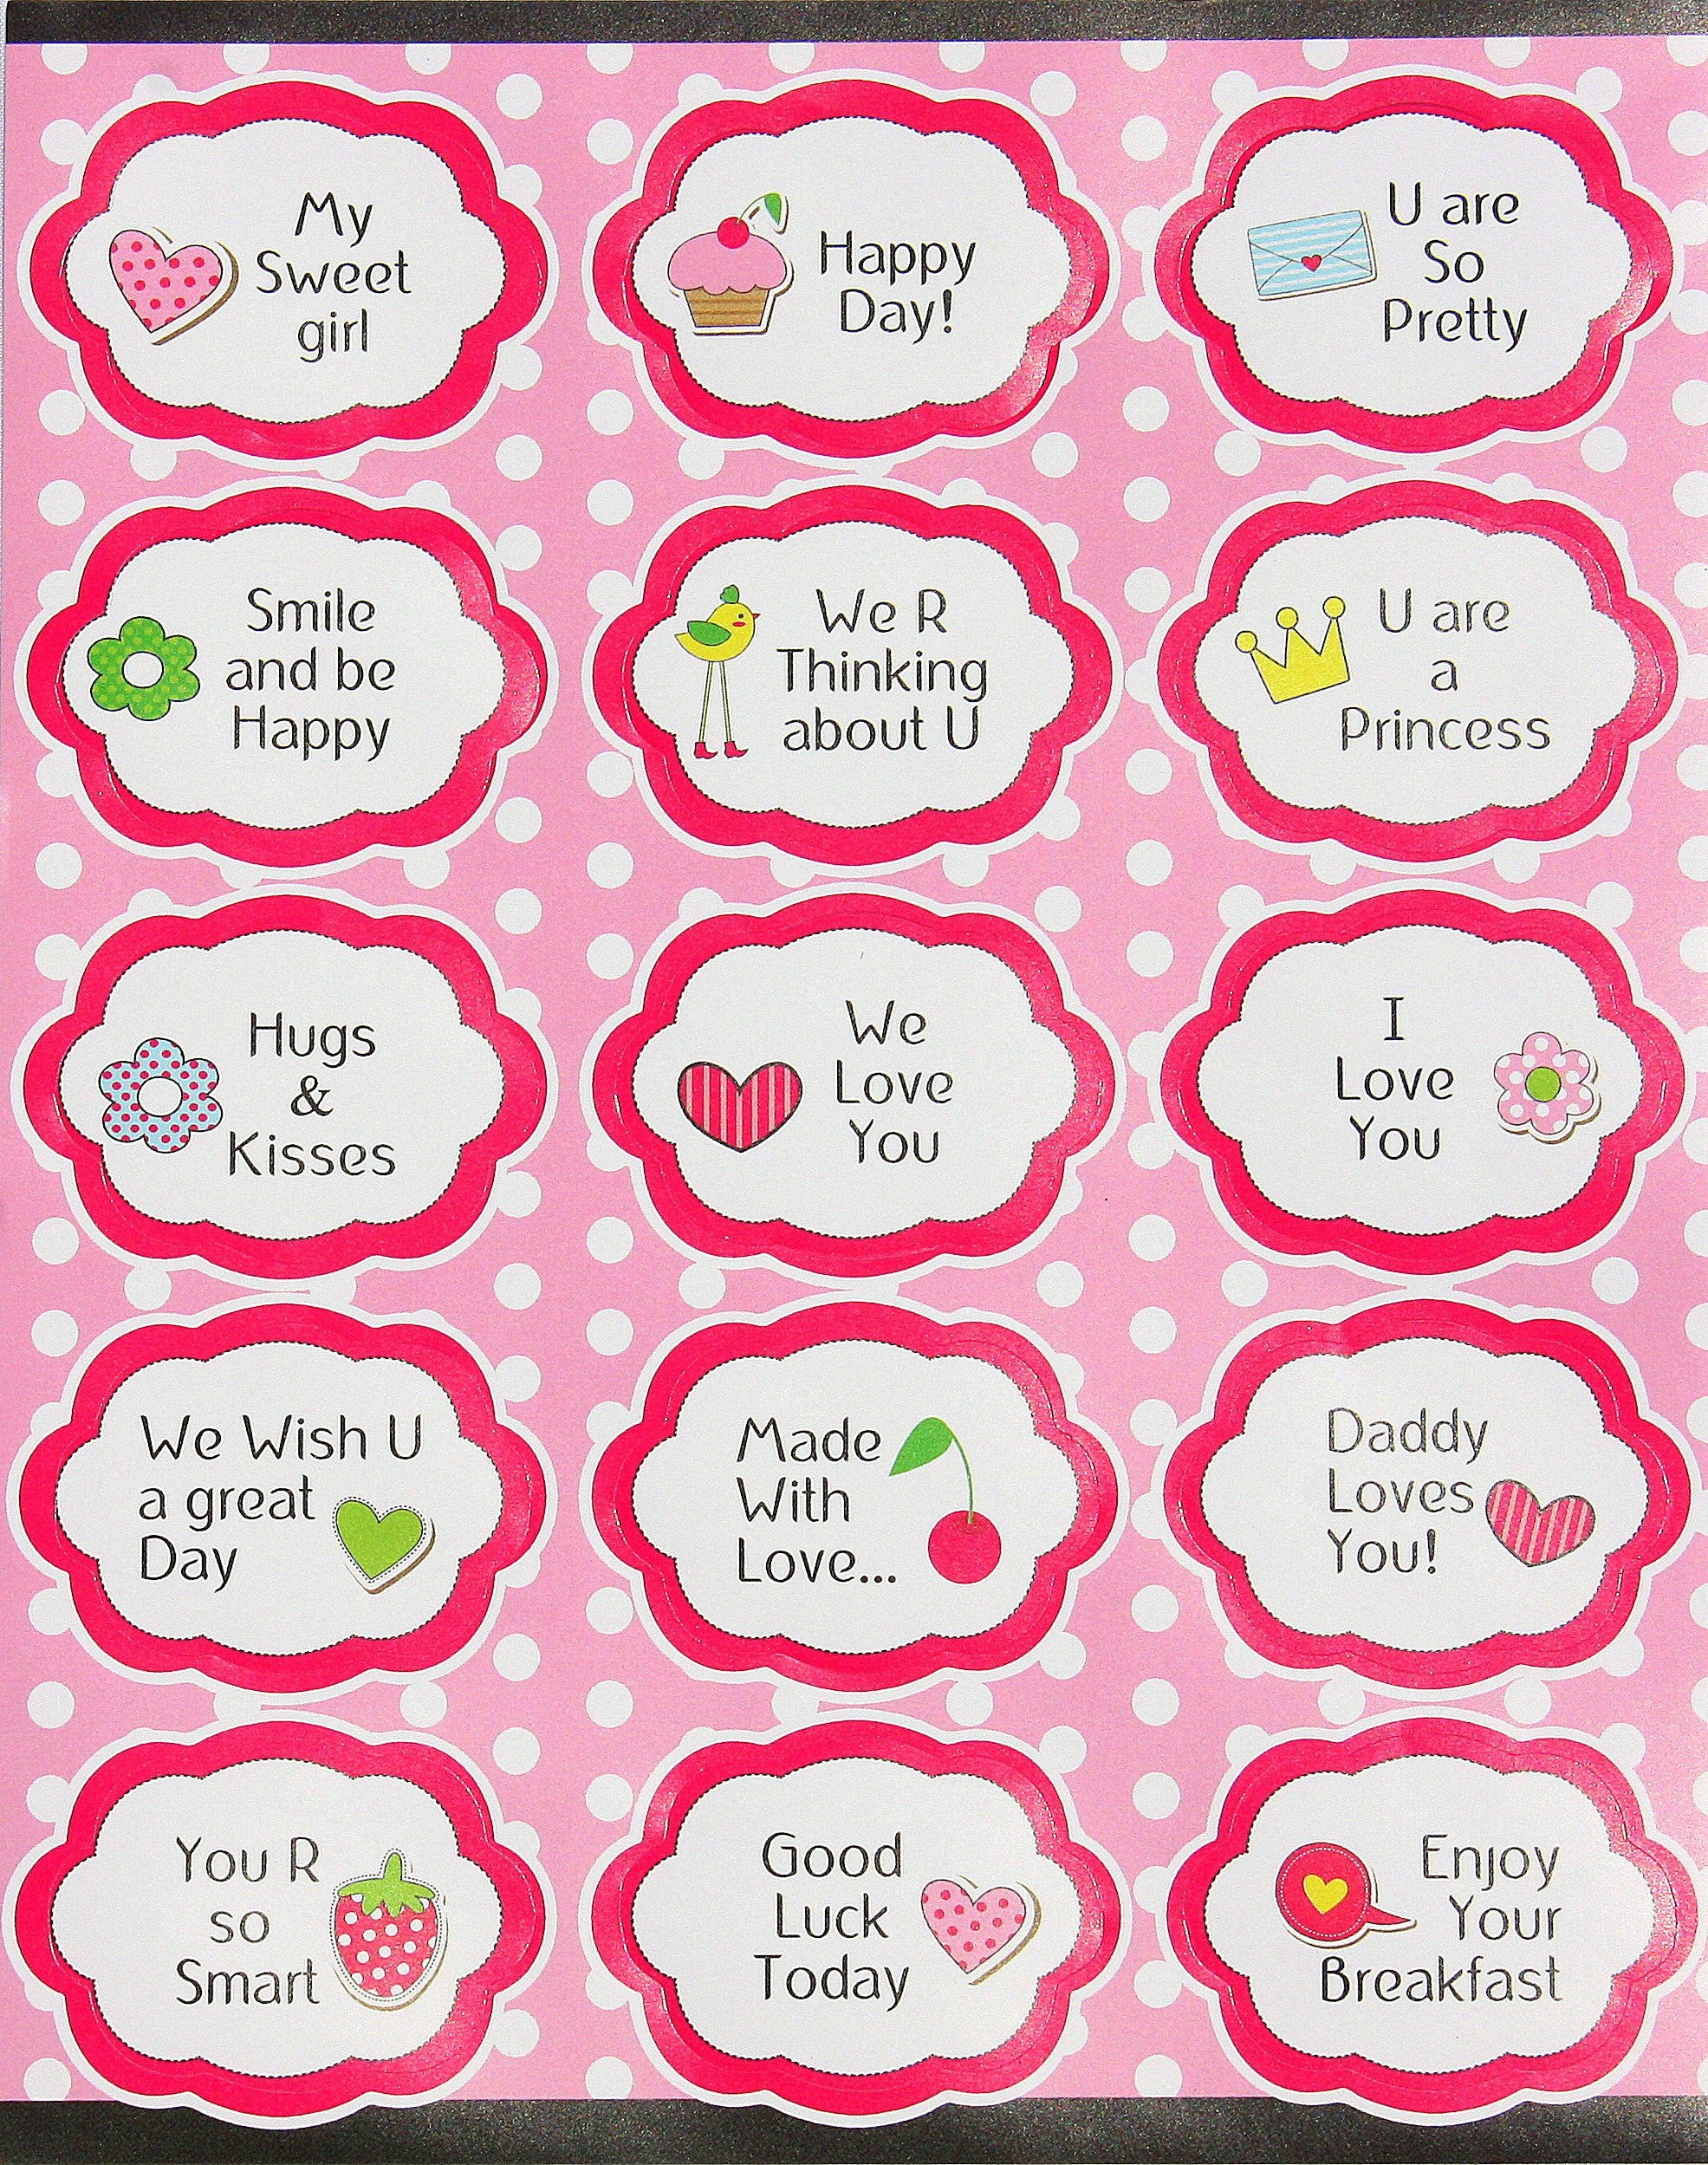 Encouraging Inspirational Positive Quotes Labels "My sweet girl" "Have a Great